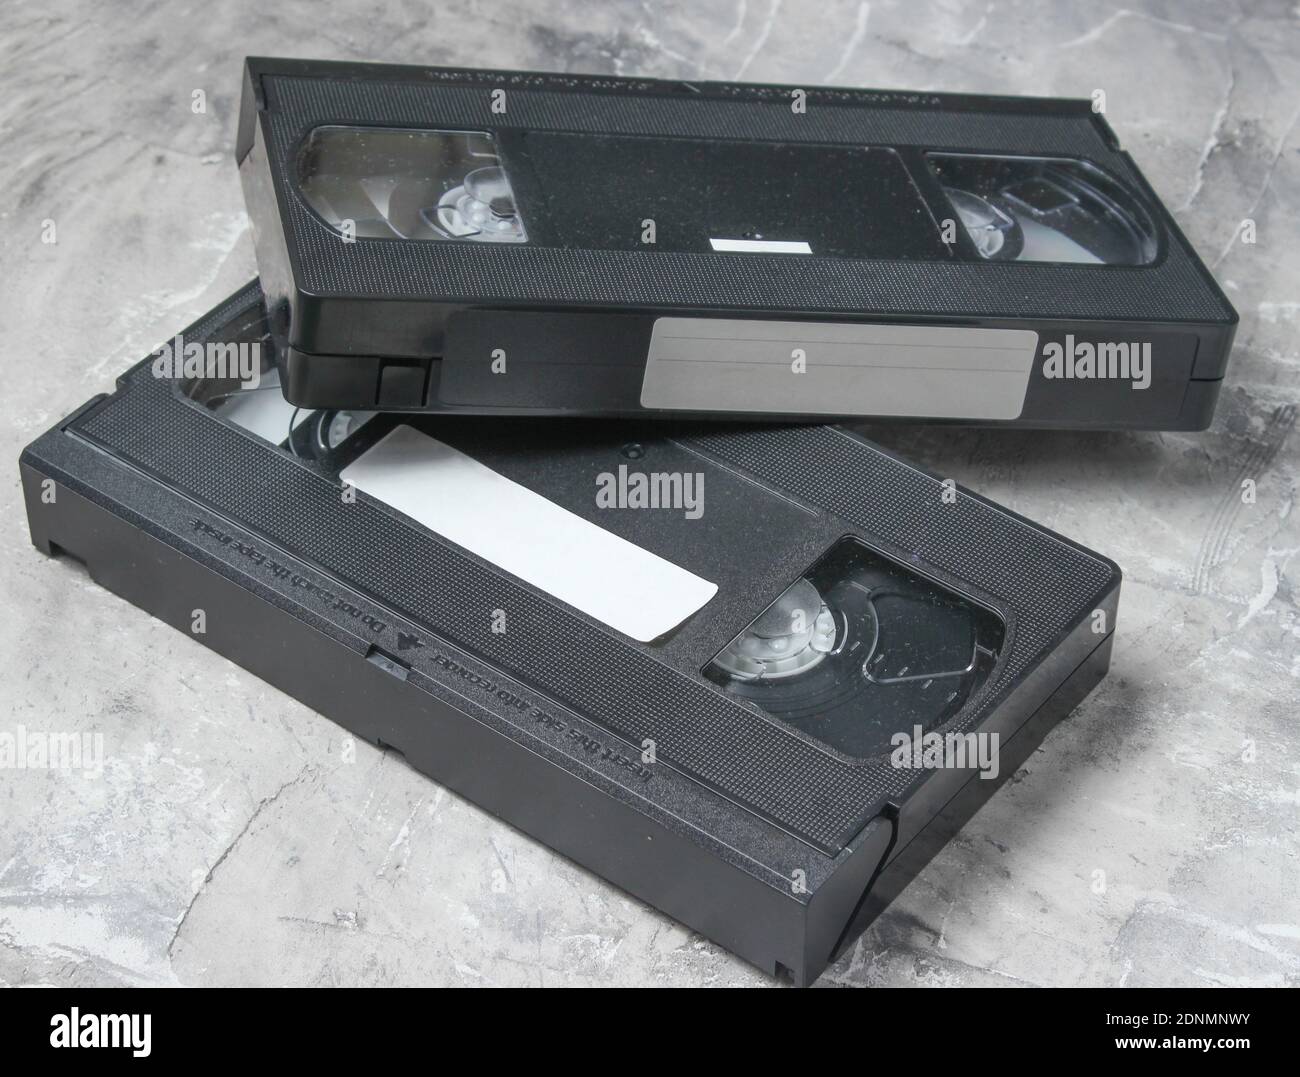 retro-vhs-video-cassettes-from-the-80s-o